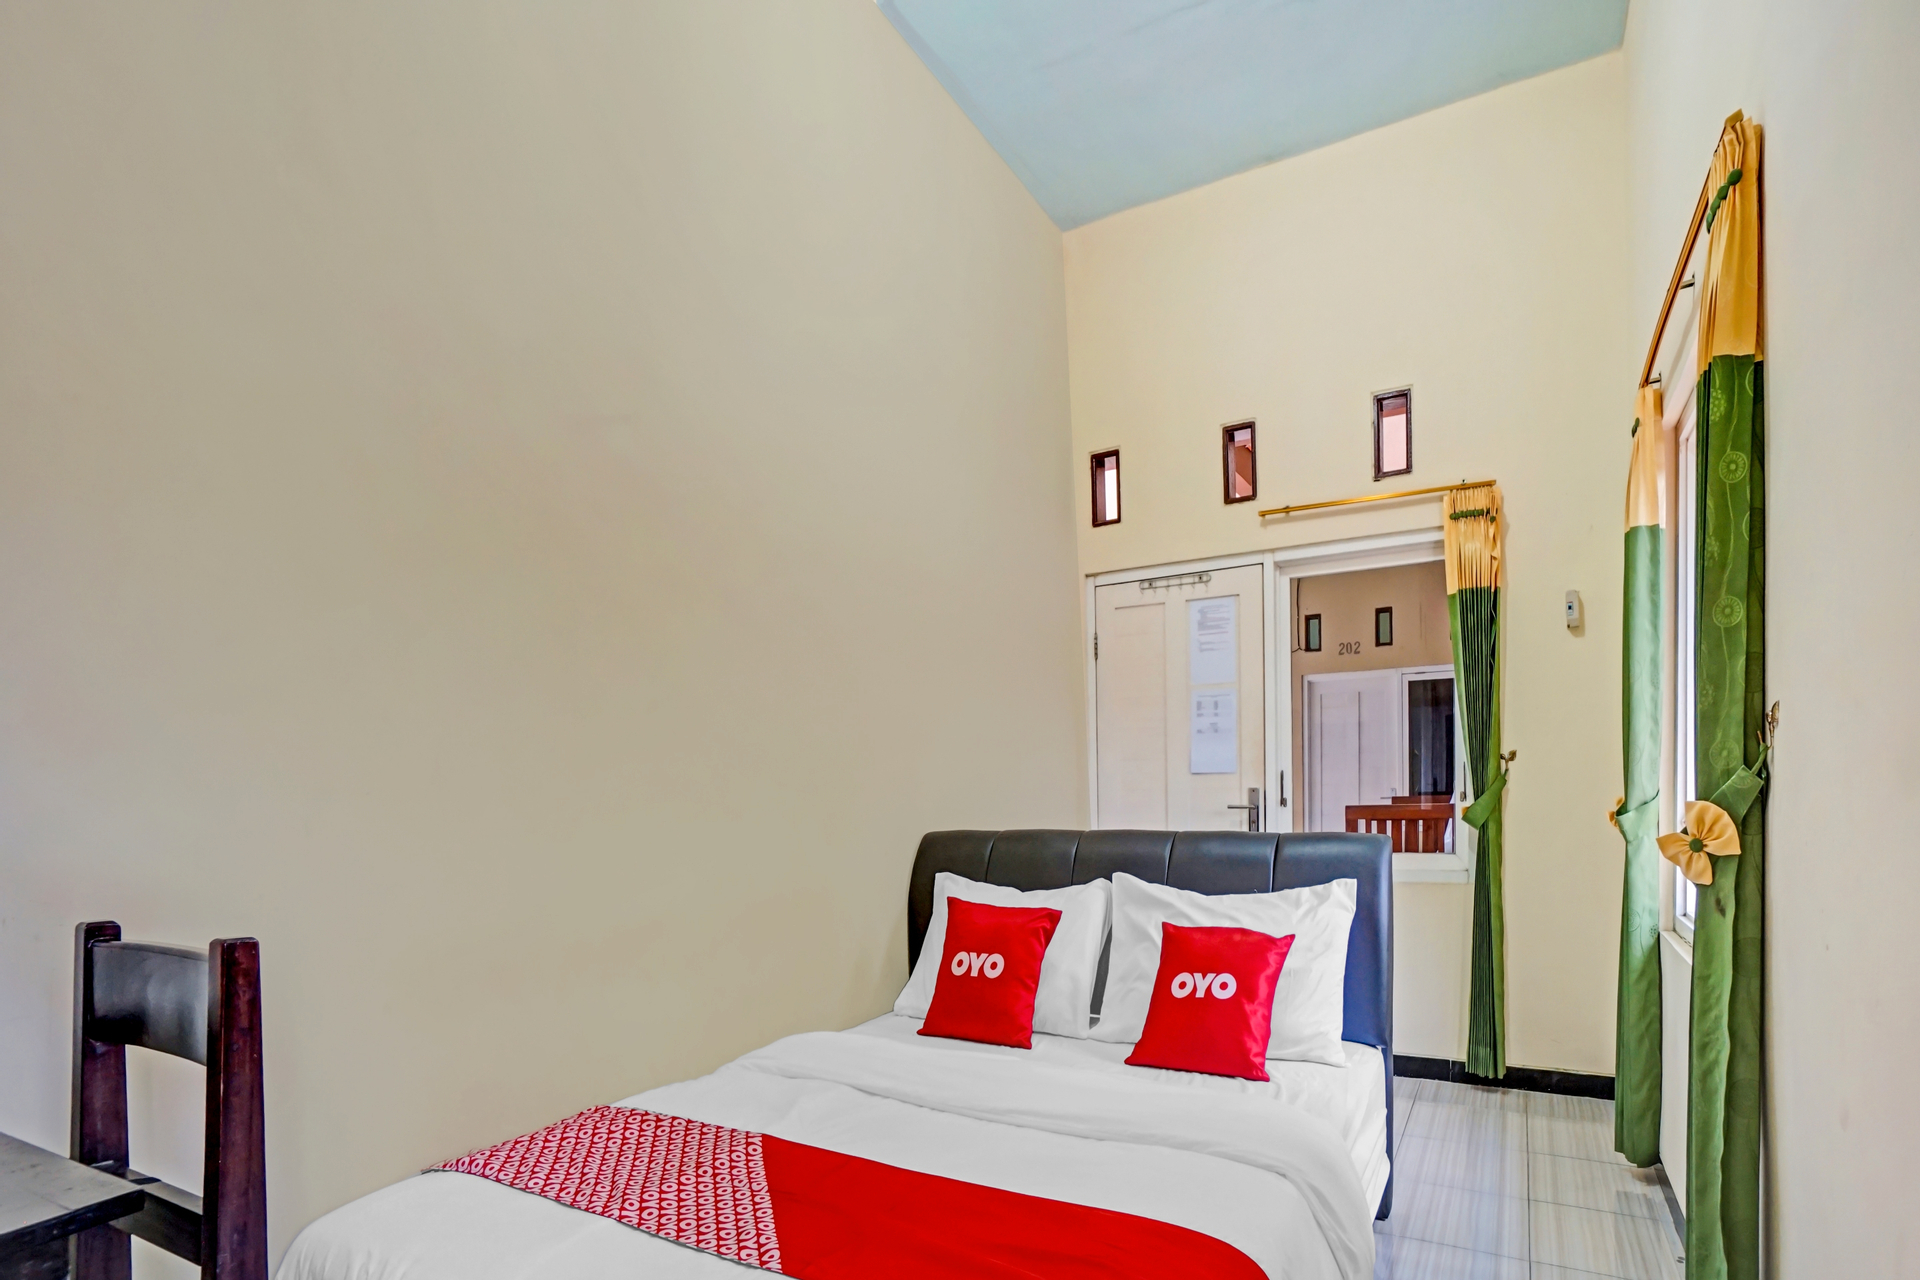 Bedroom 1, OYO 3298 Bromo Guest House Family, Malang